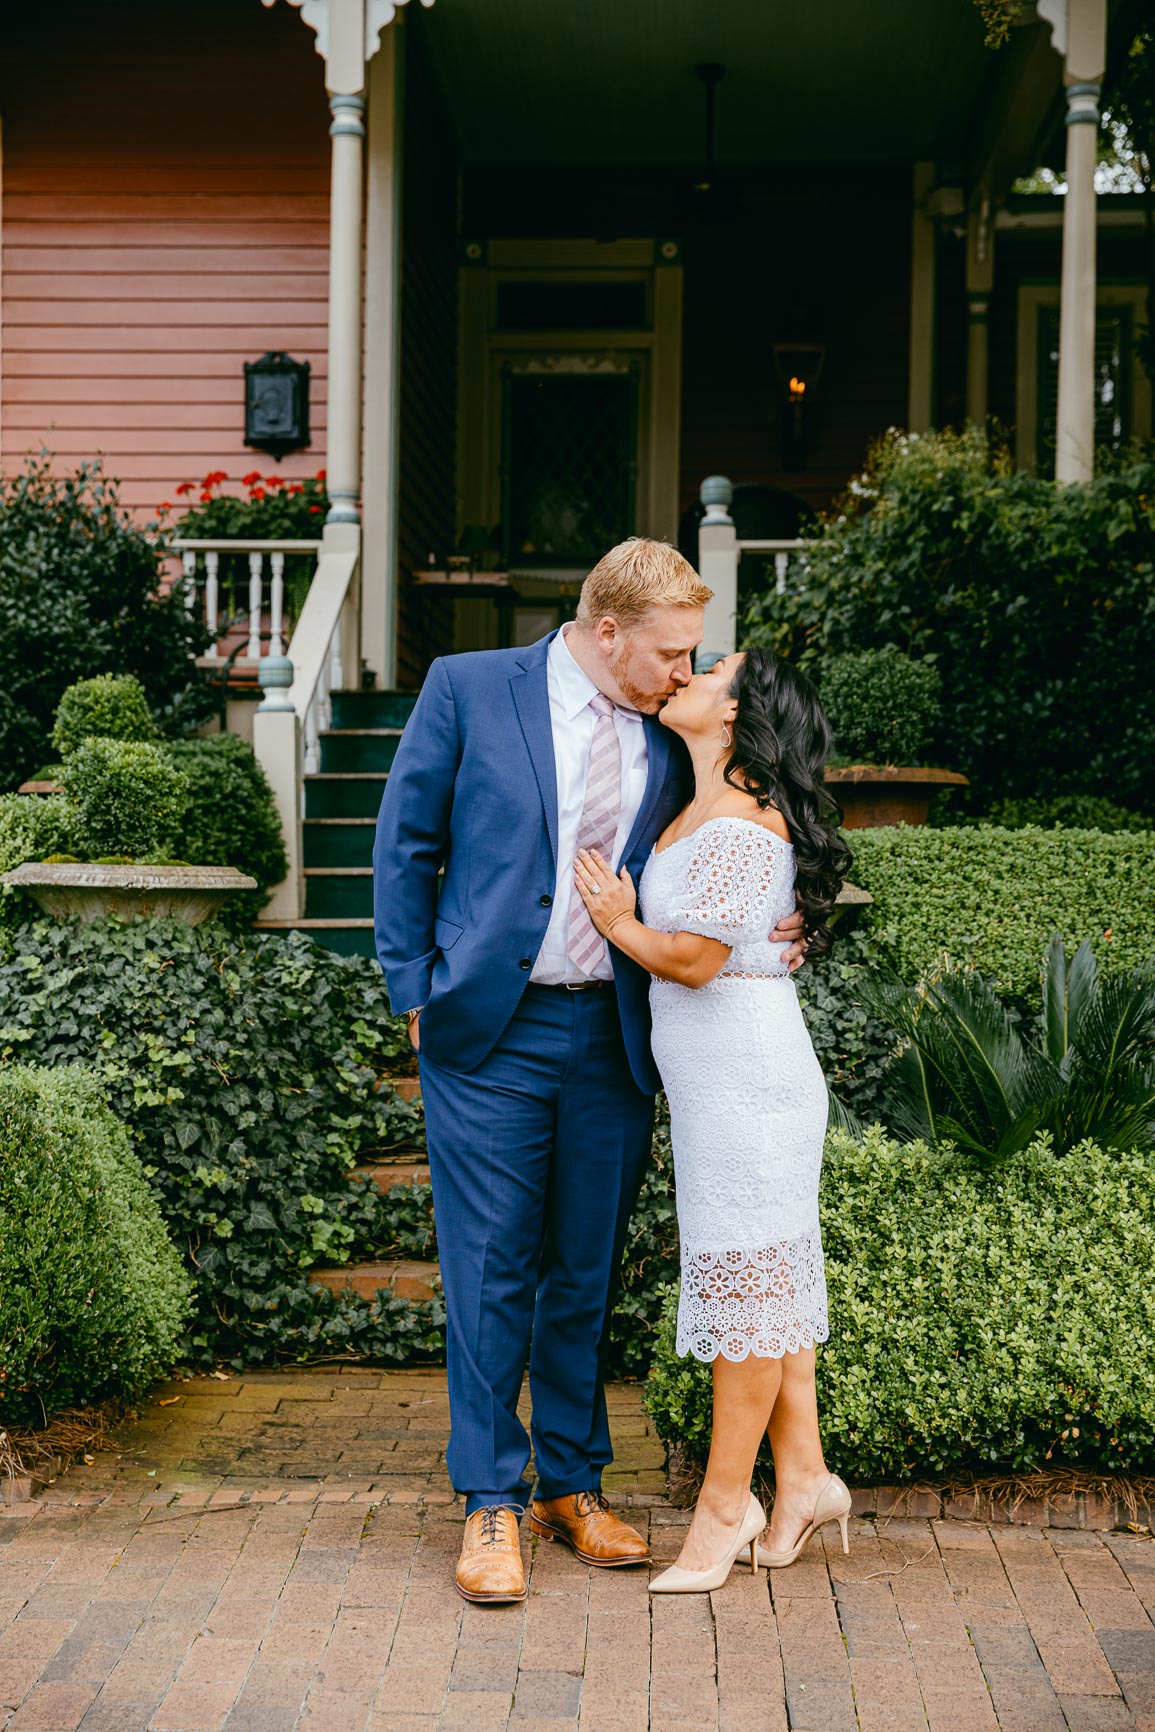 Charlotte Fourth Ward district engagement session shot by Nhieu Tang Photography | nhieutang.com